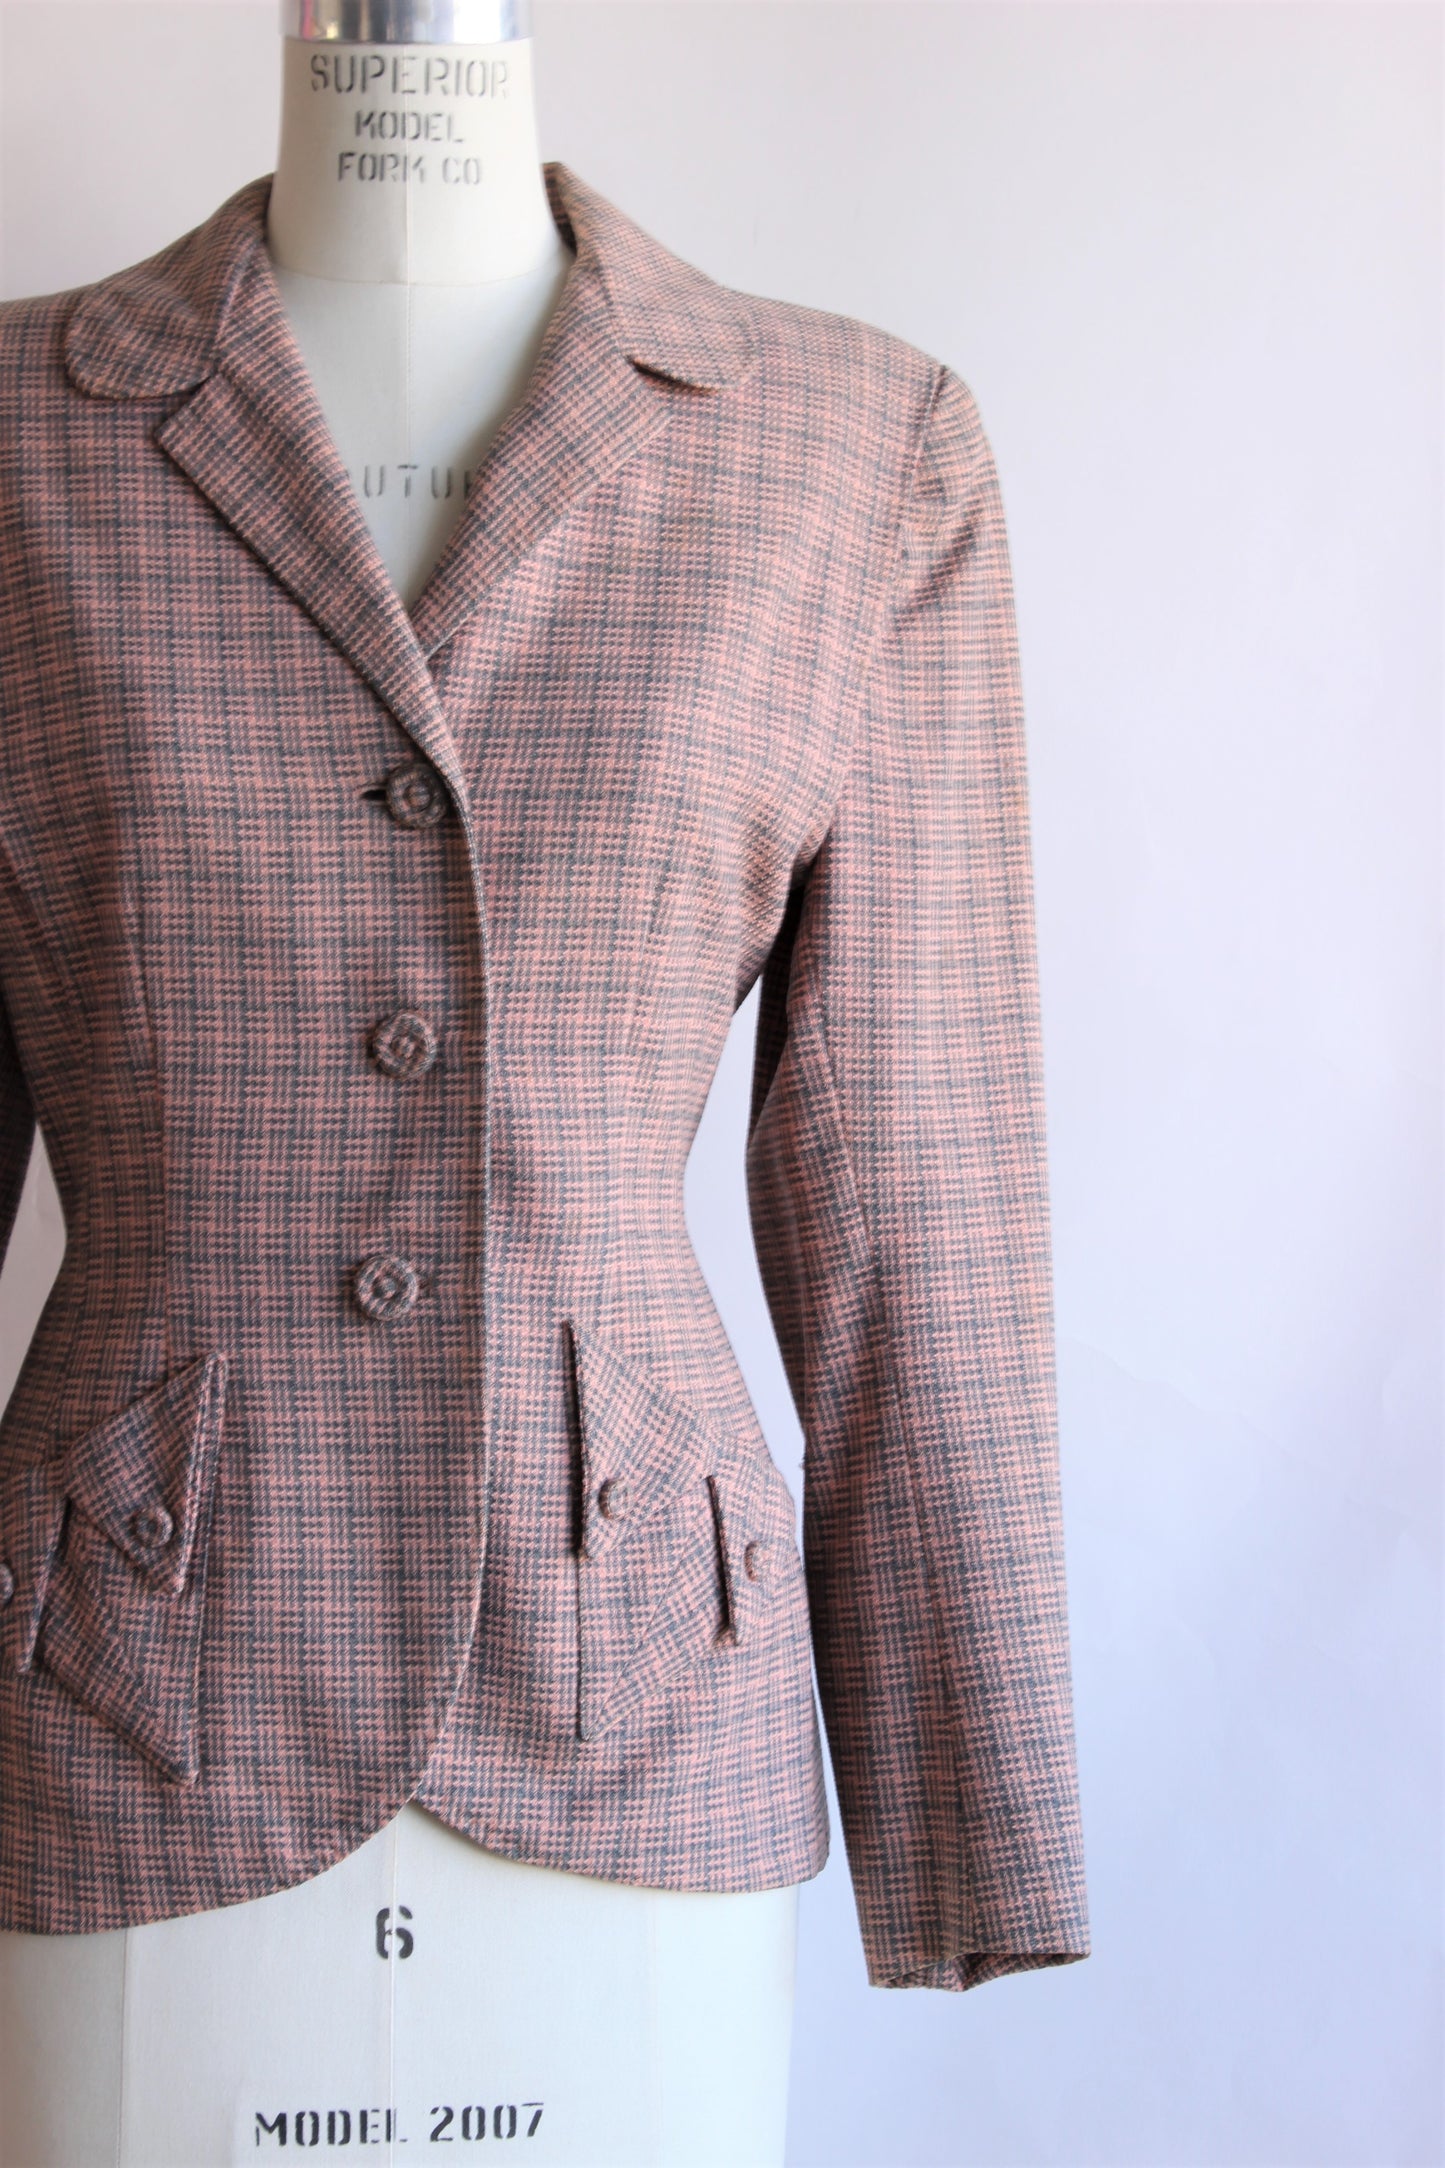 Vintage 1950s Gray and Pink Jacket With Pink Lining By Friedmont ...